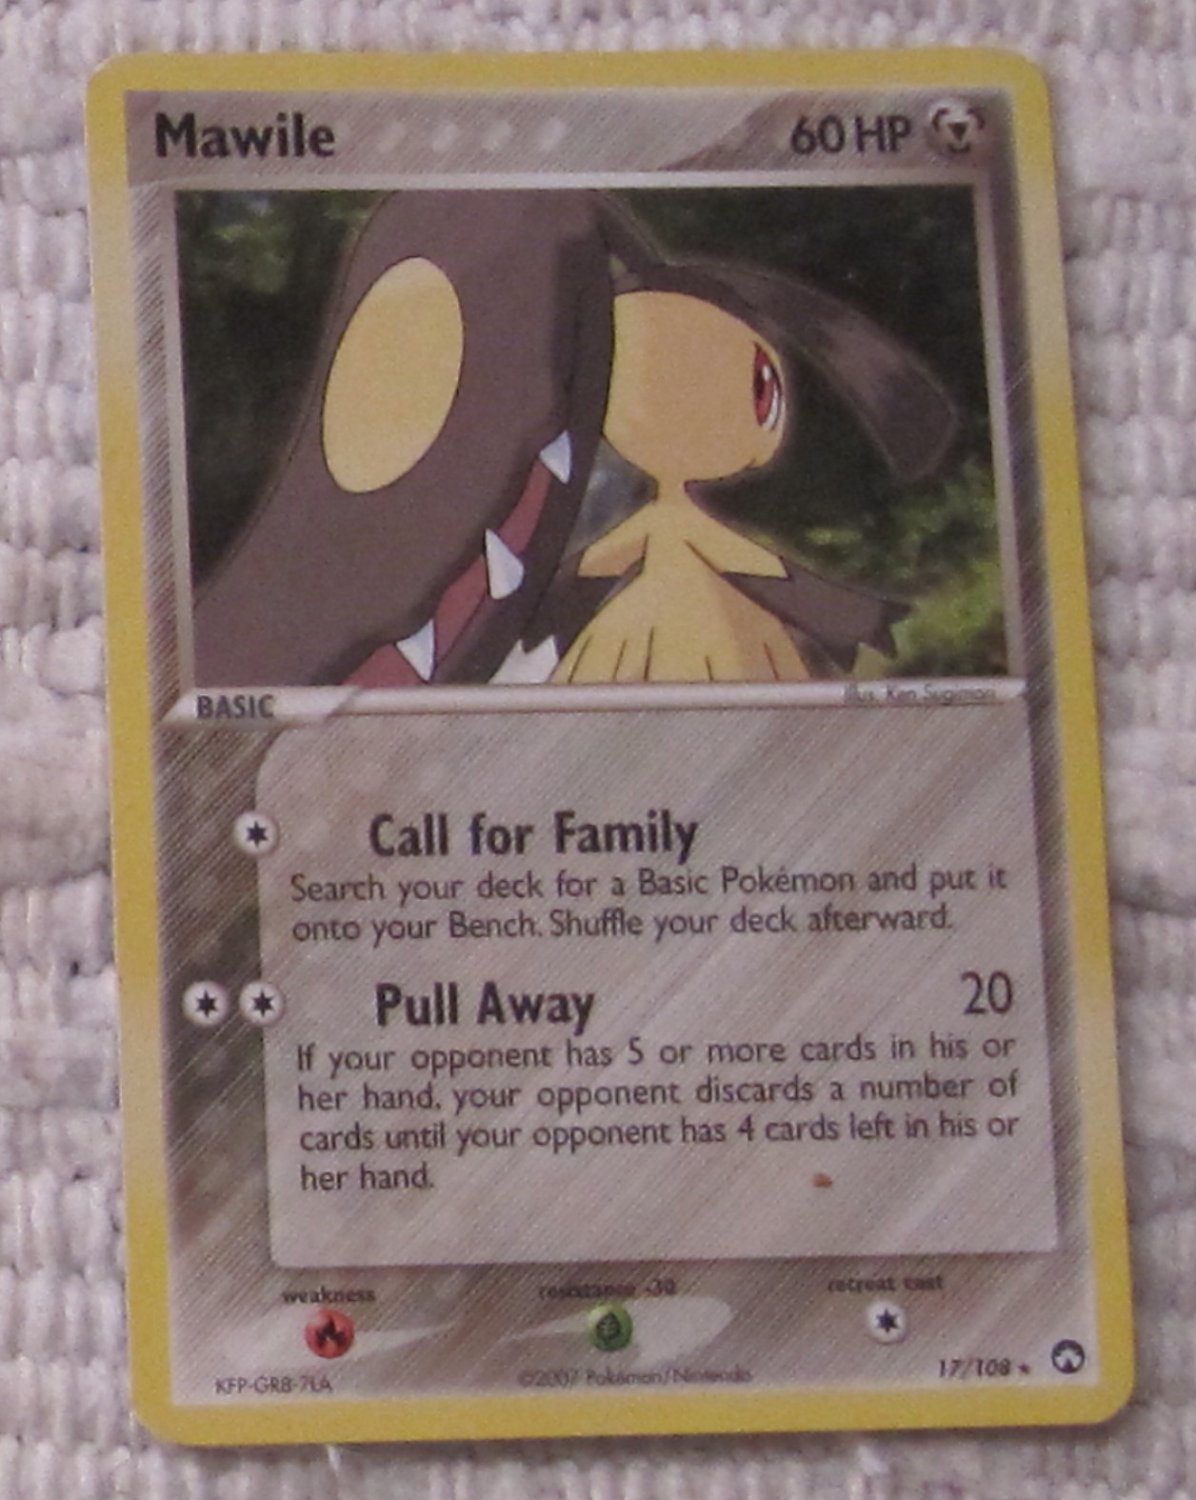 Authentic POKEMON MAWILE Card 17/108 (c) 2007 Near Mint